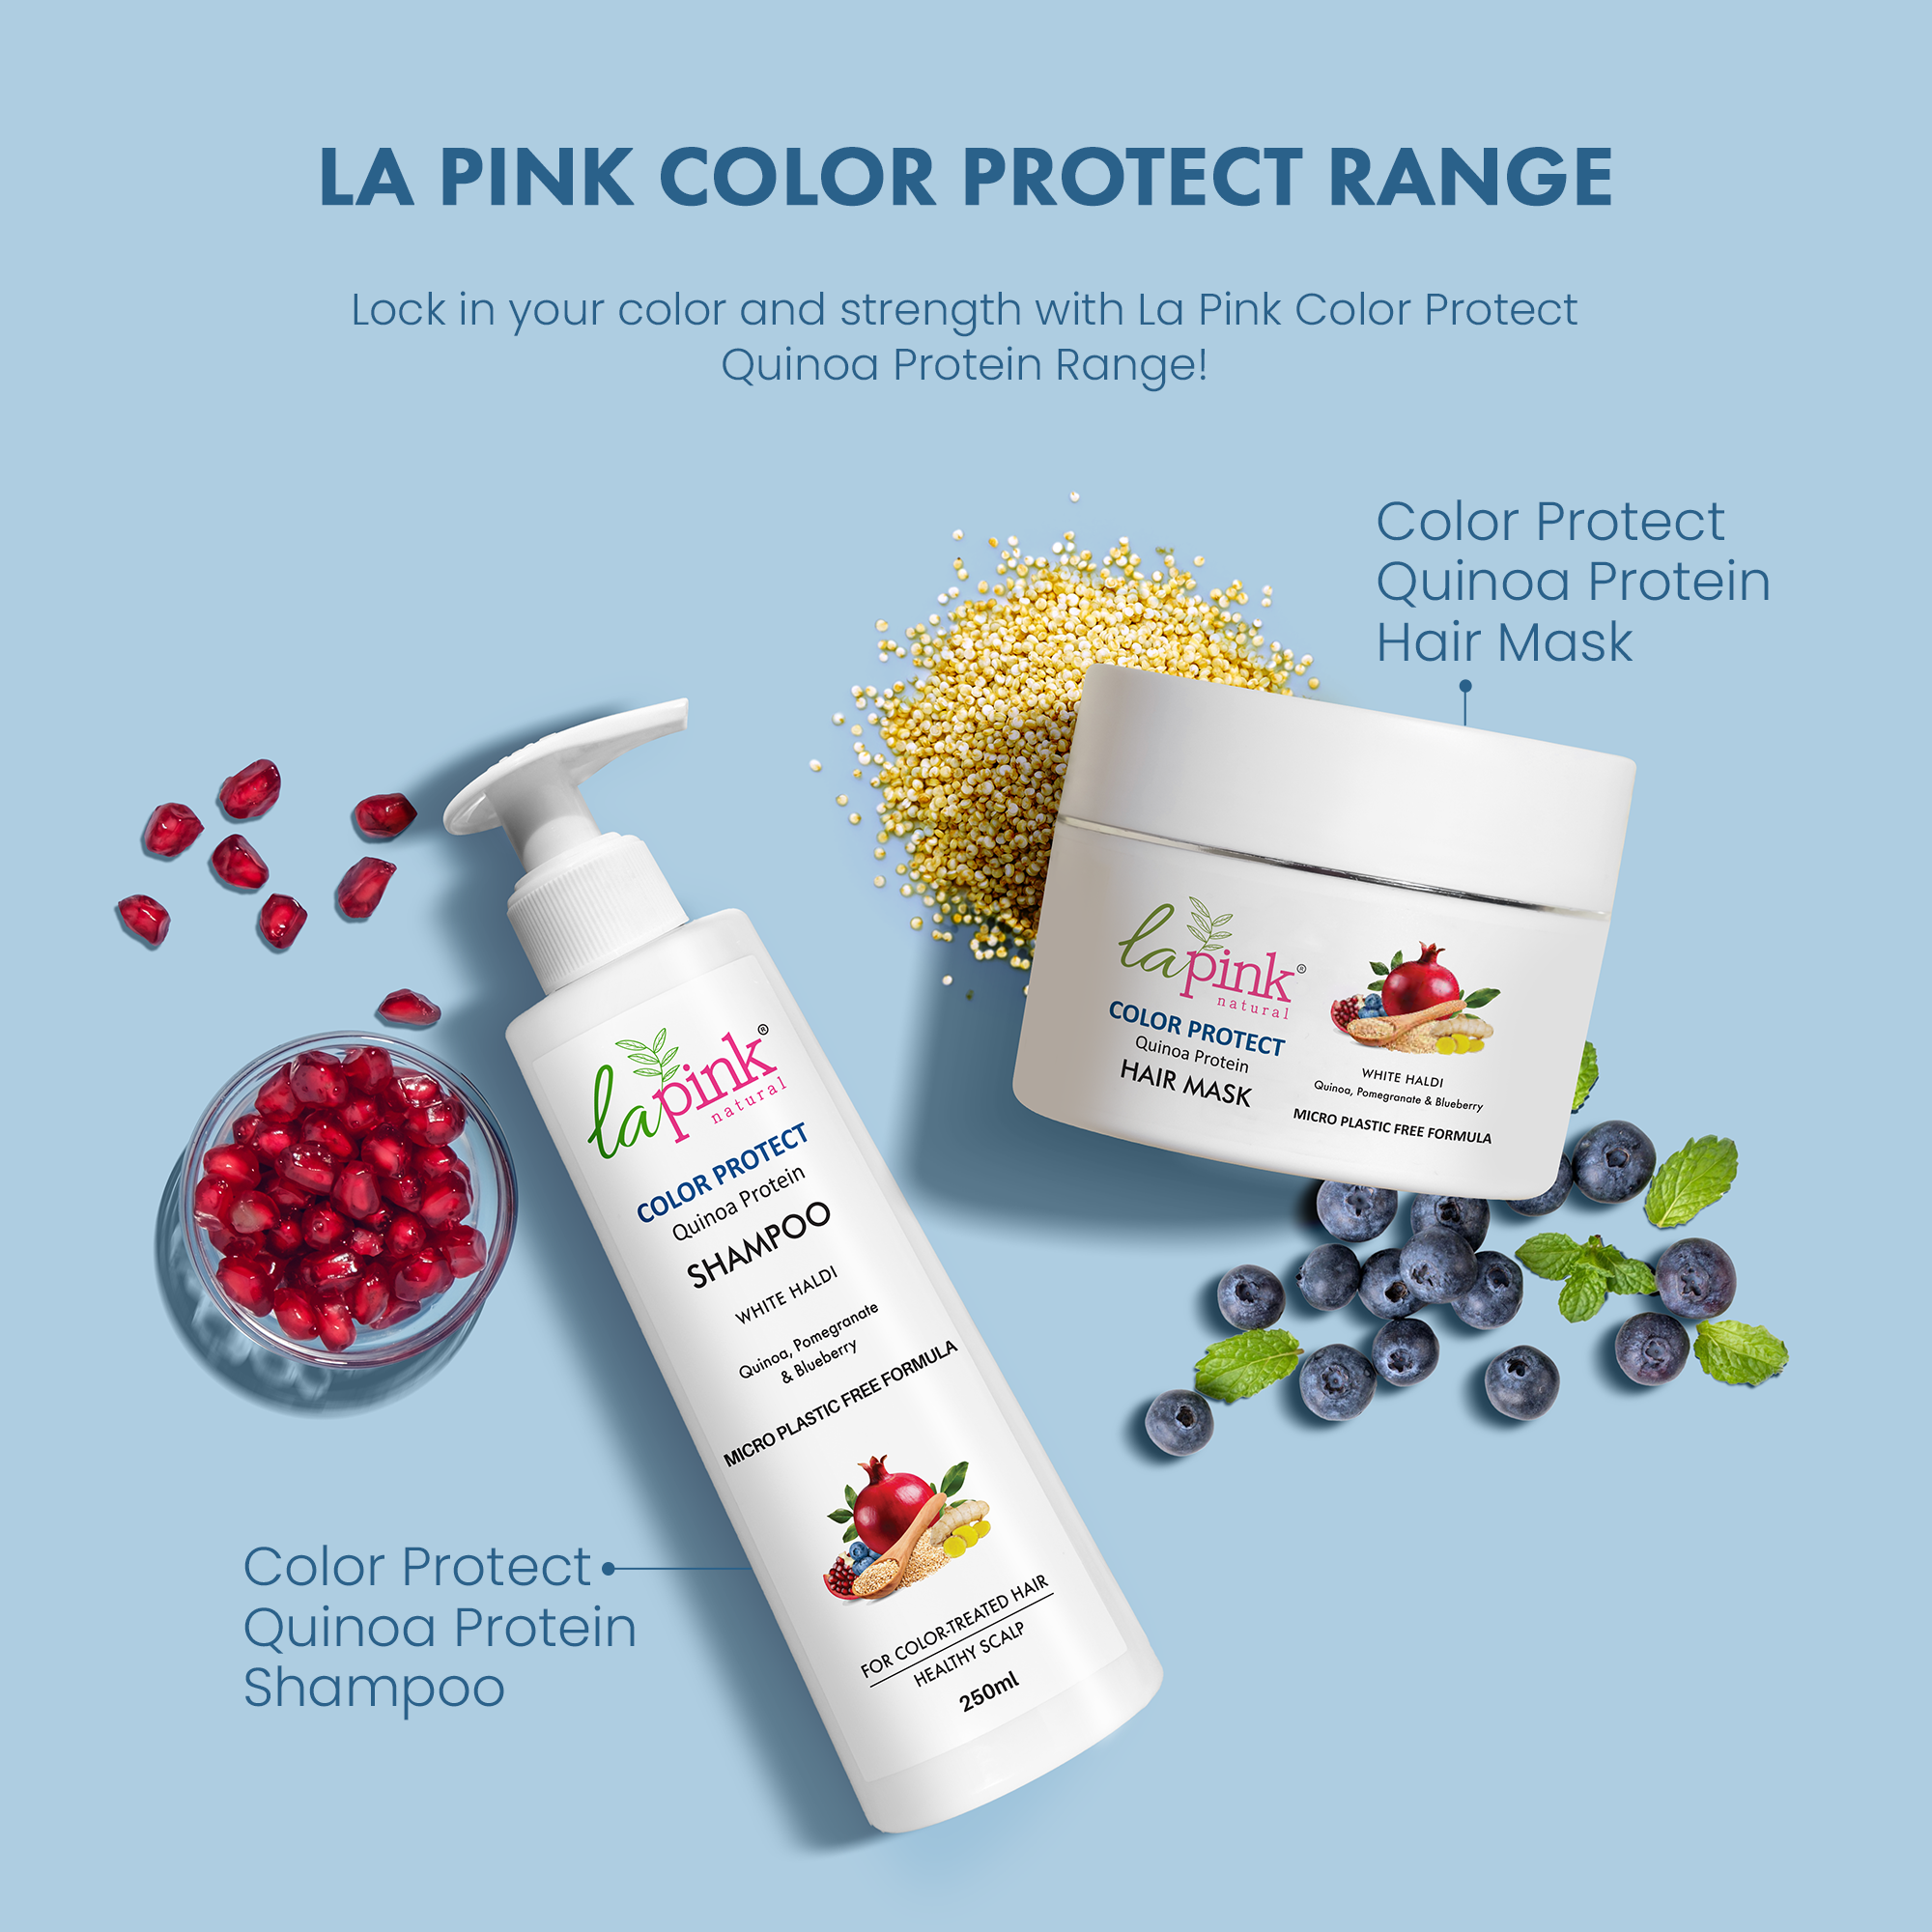 Color Protect Quinoa Protein Hair Mask with White Haldi to Increase Longevity